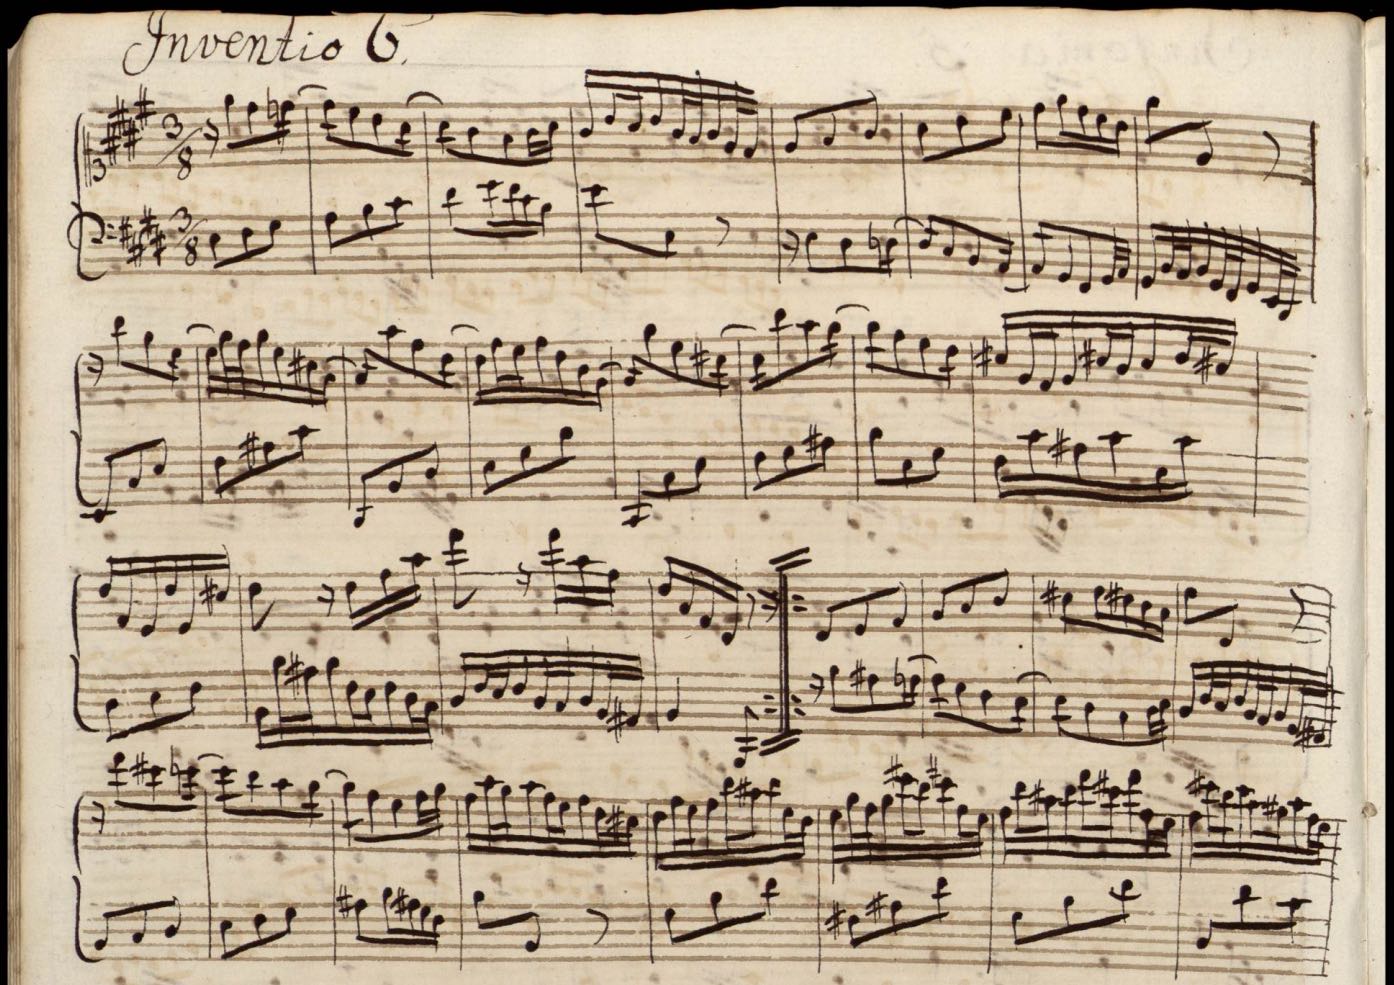 A photo of sheet music for Bach's Invention #6.